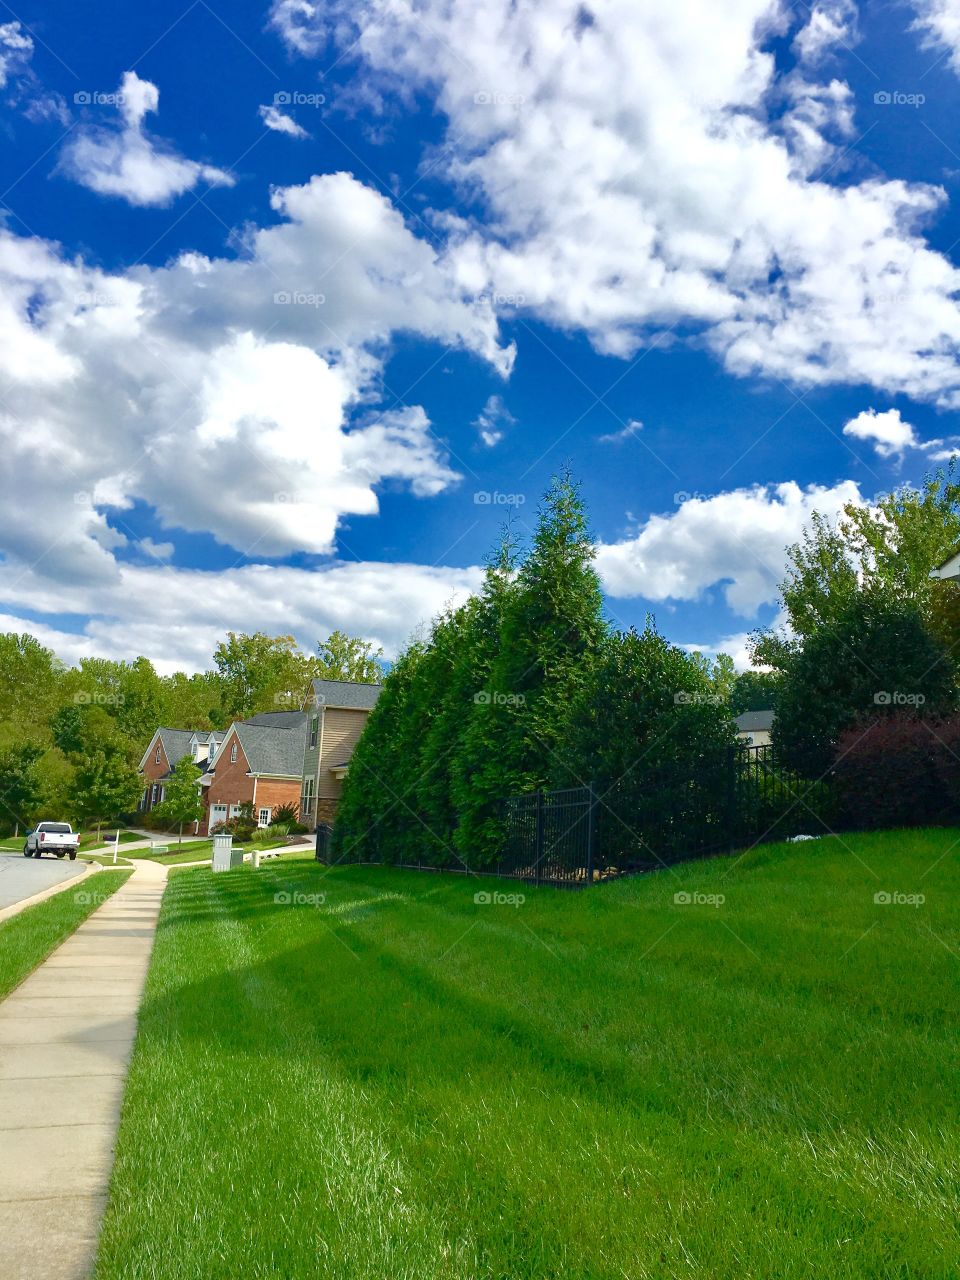 Lawn , sky and house